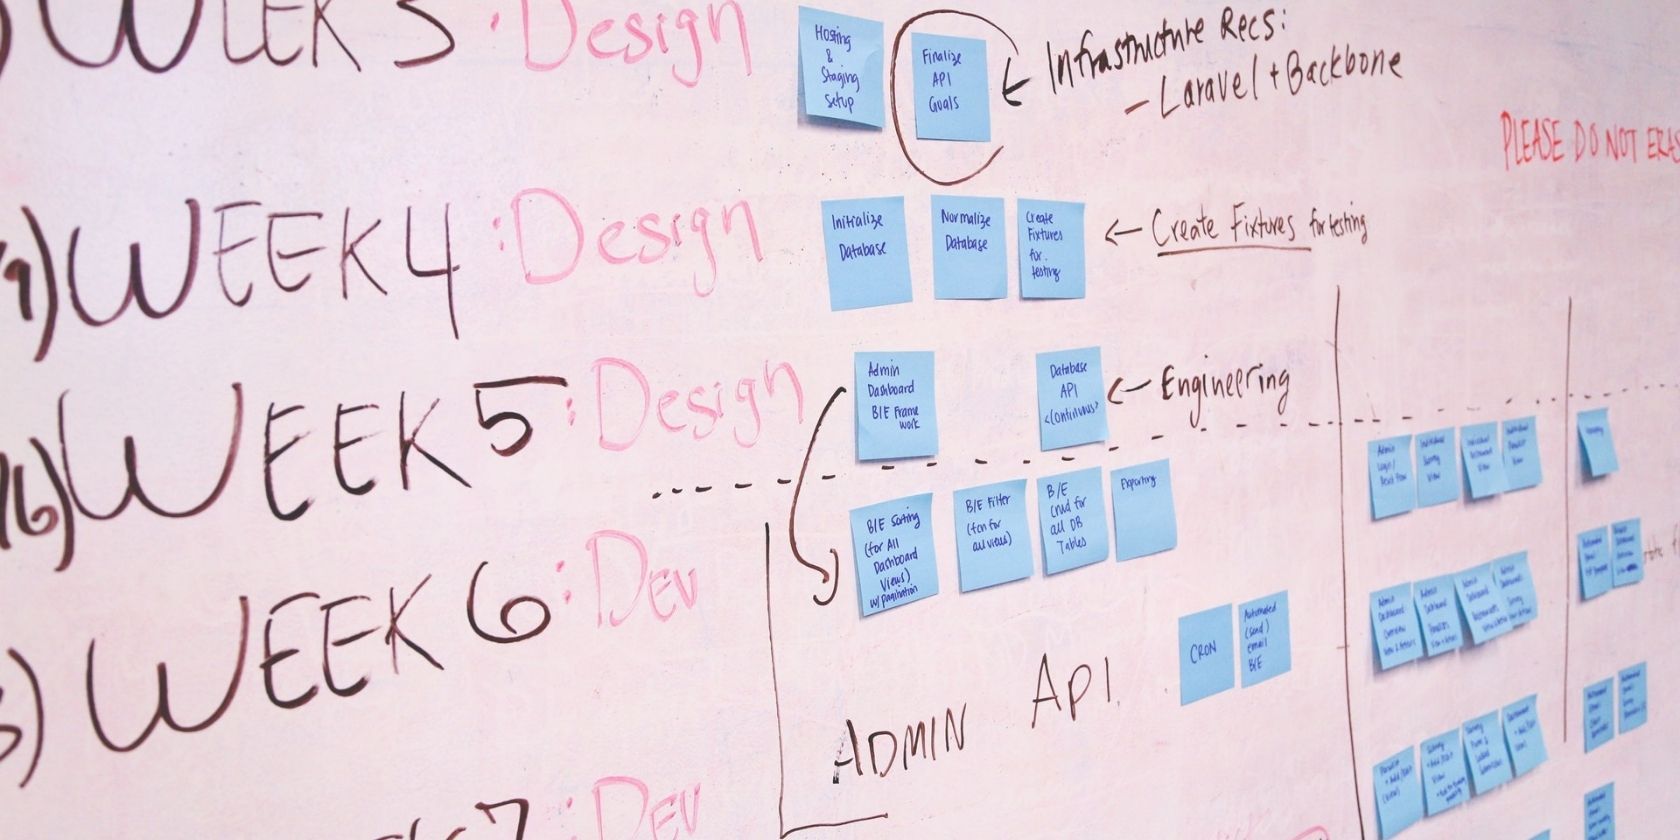 A photo of a board with a project plan illustrates an article on Microsoft 365's Board View